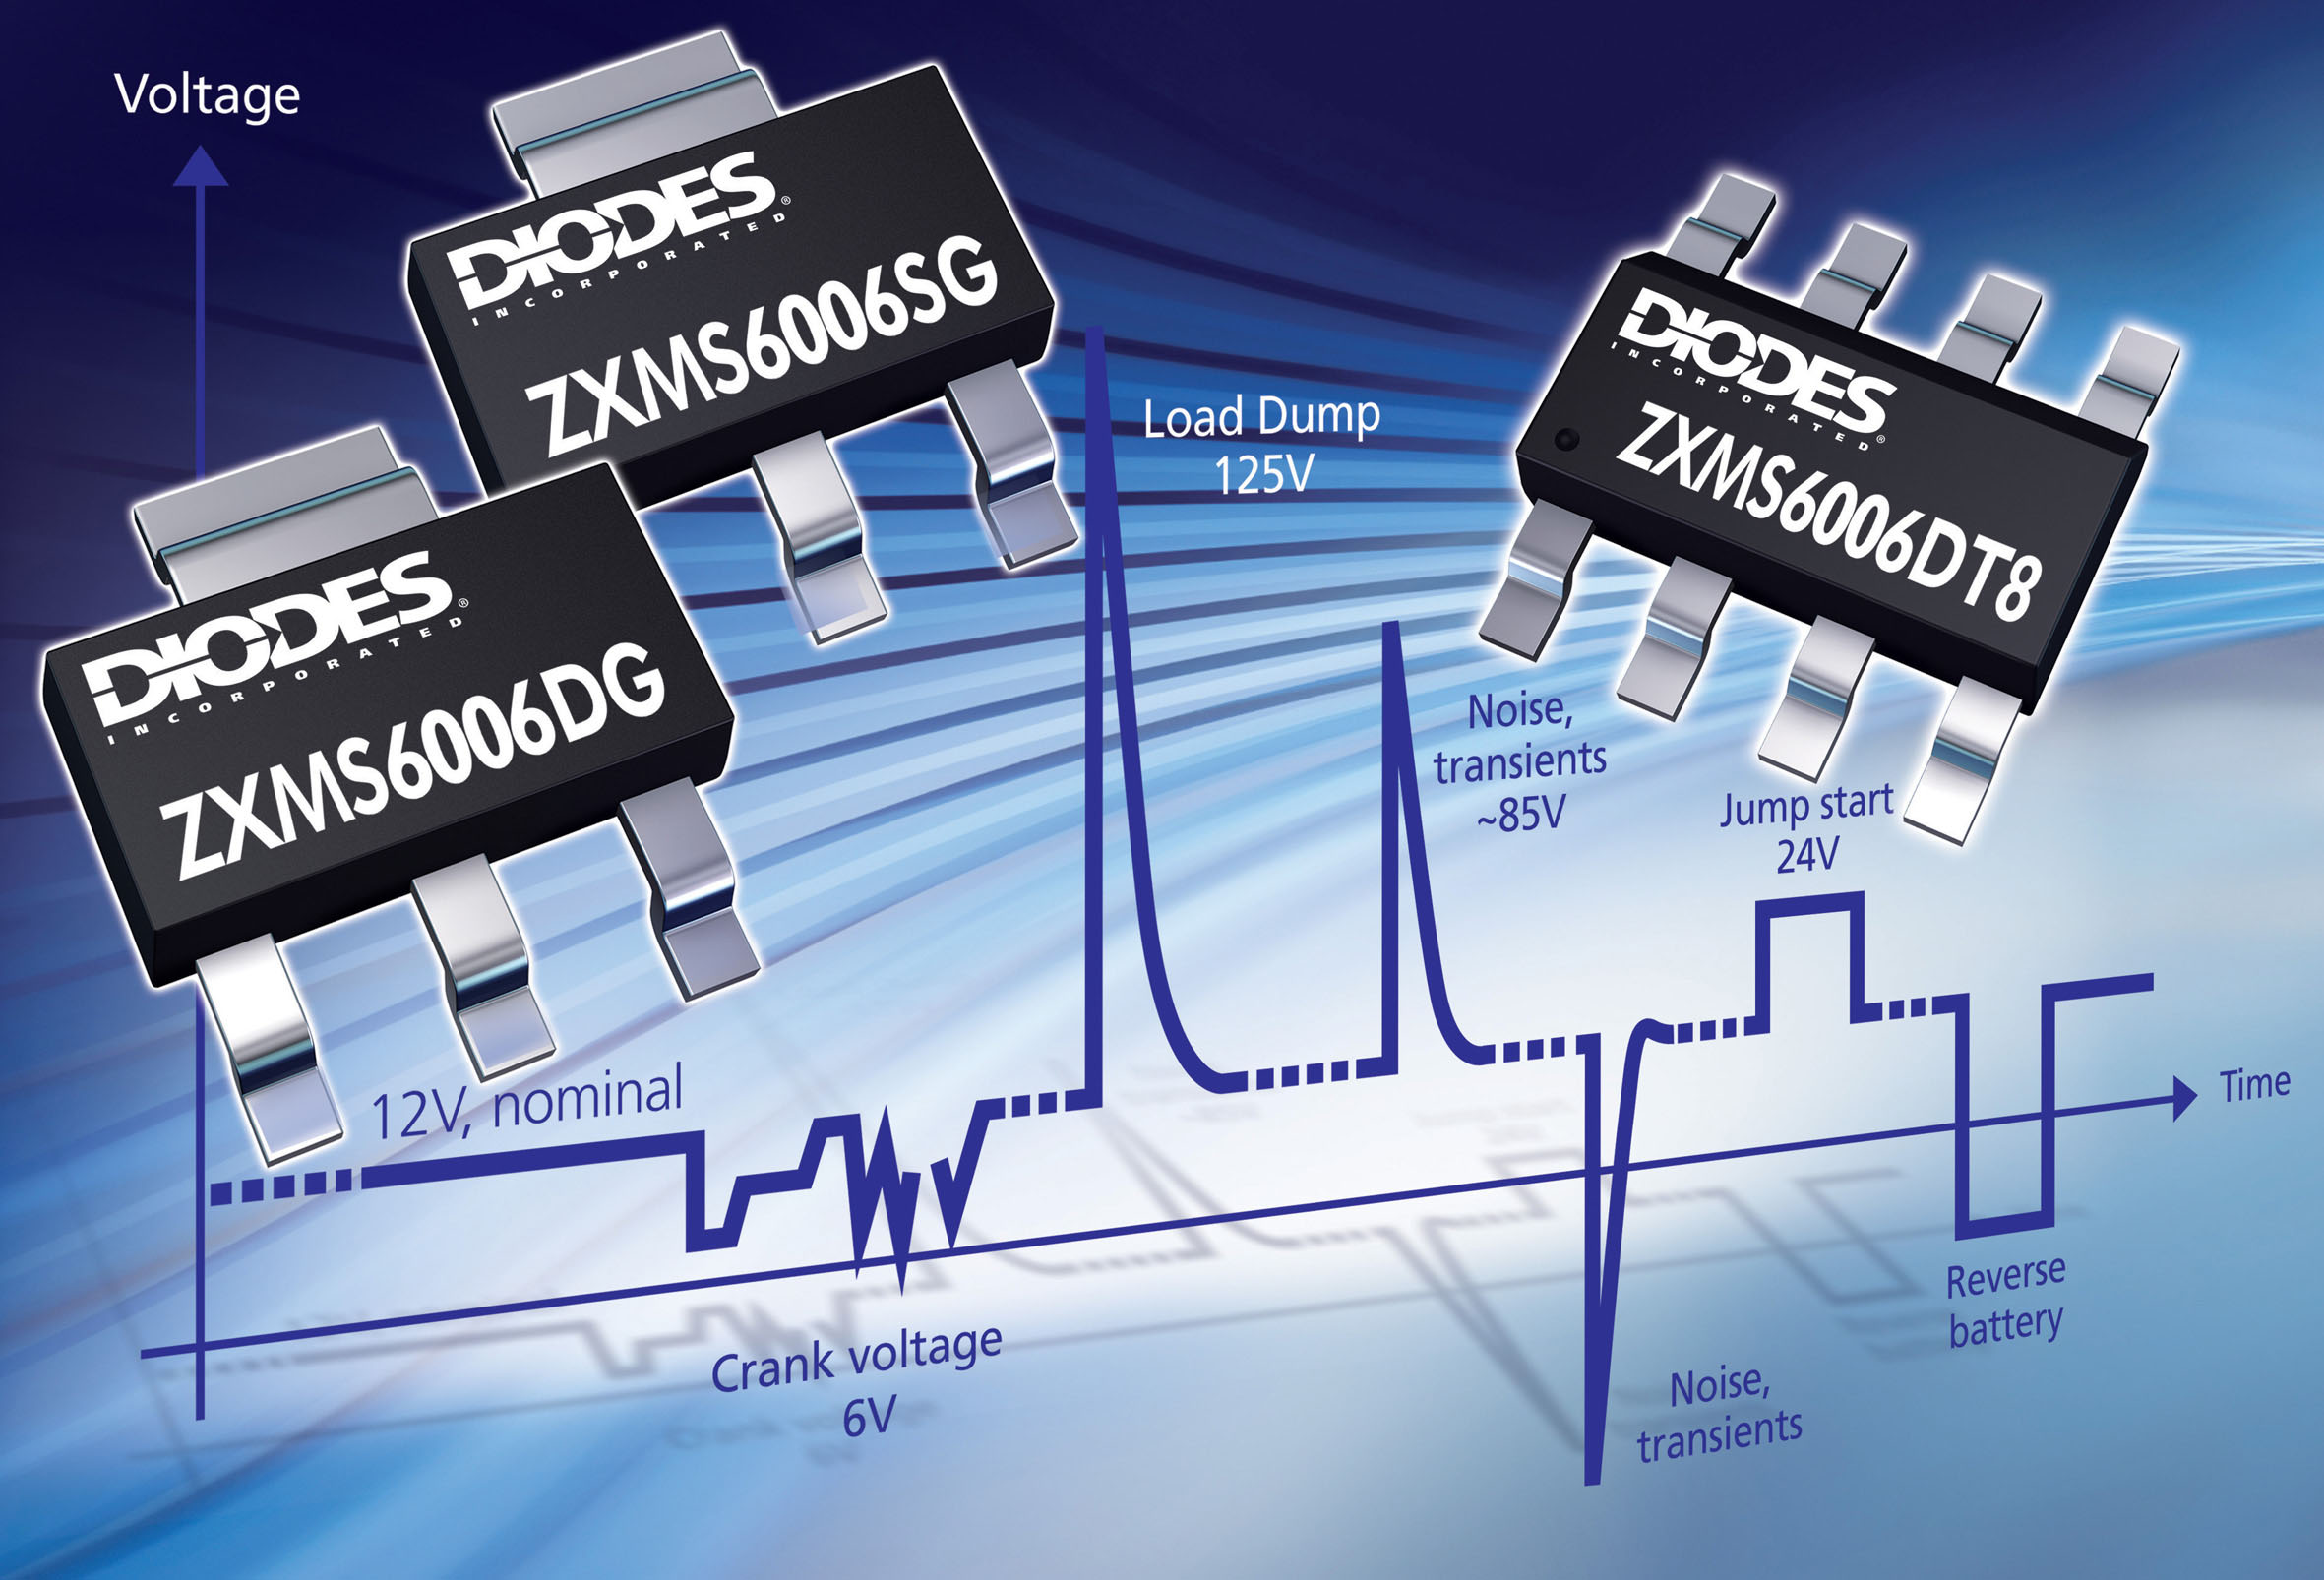 Diodes Self-Protected MOSFETs Raise Protection Levels for Inductive Loads